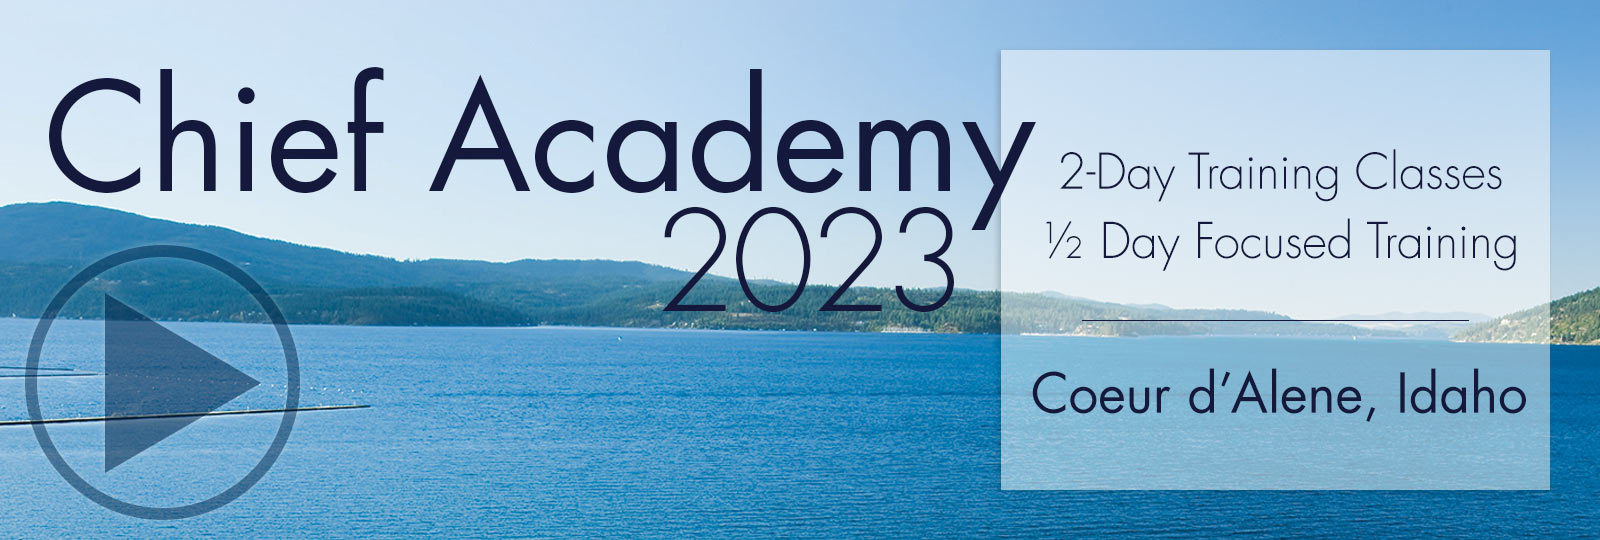 Chief Academy 2023 will consist of two days of classroom training and a half-day of focused training in Coeur d'Alene, Idaho.